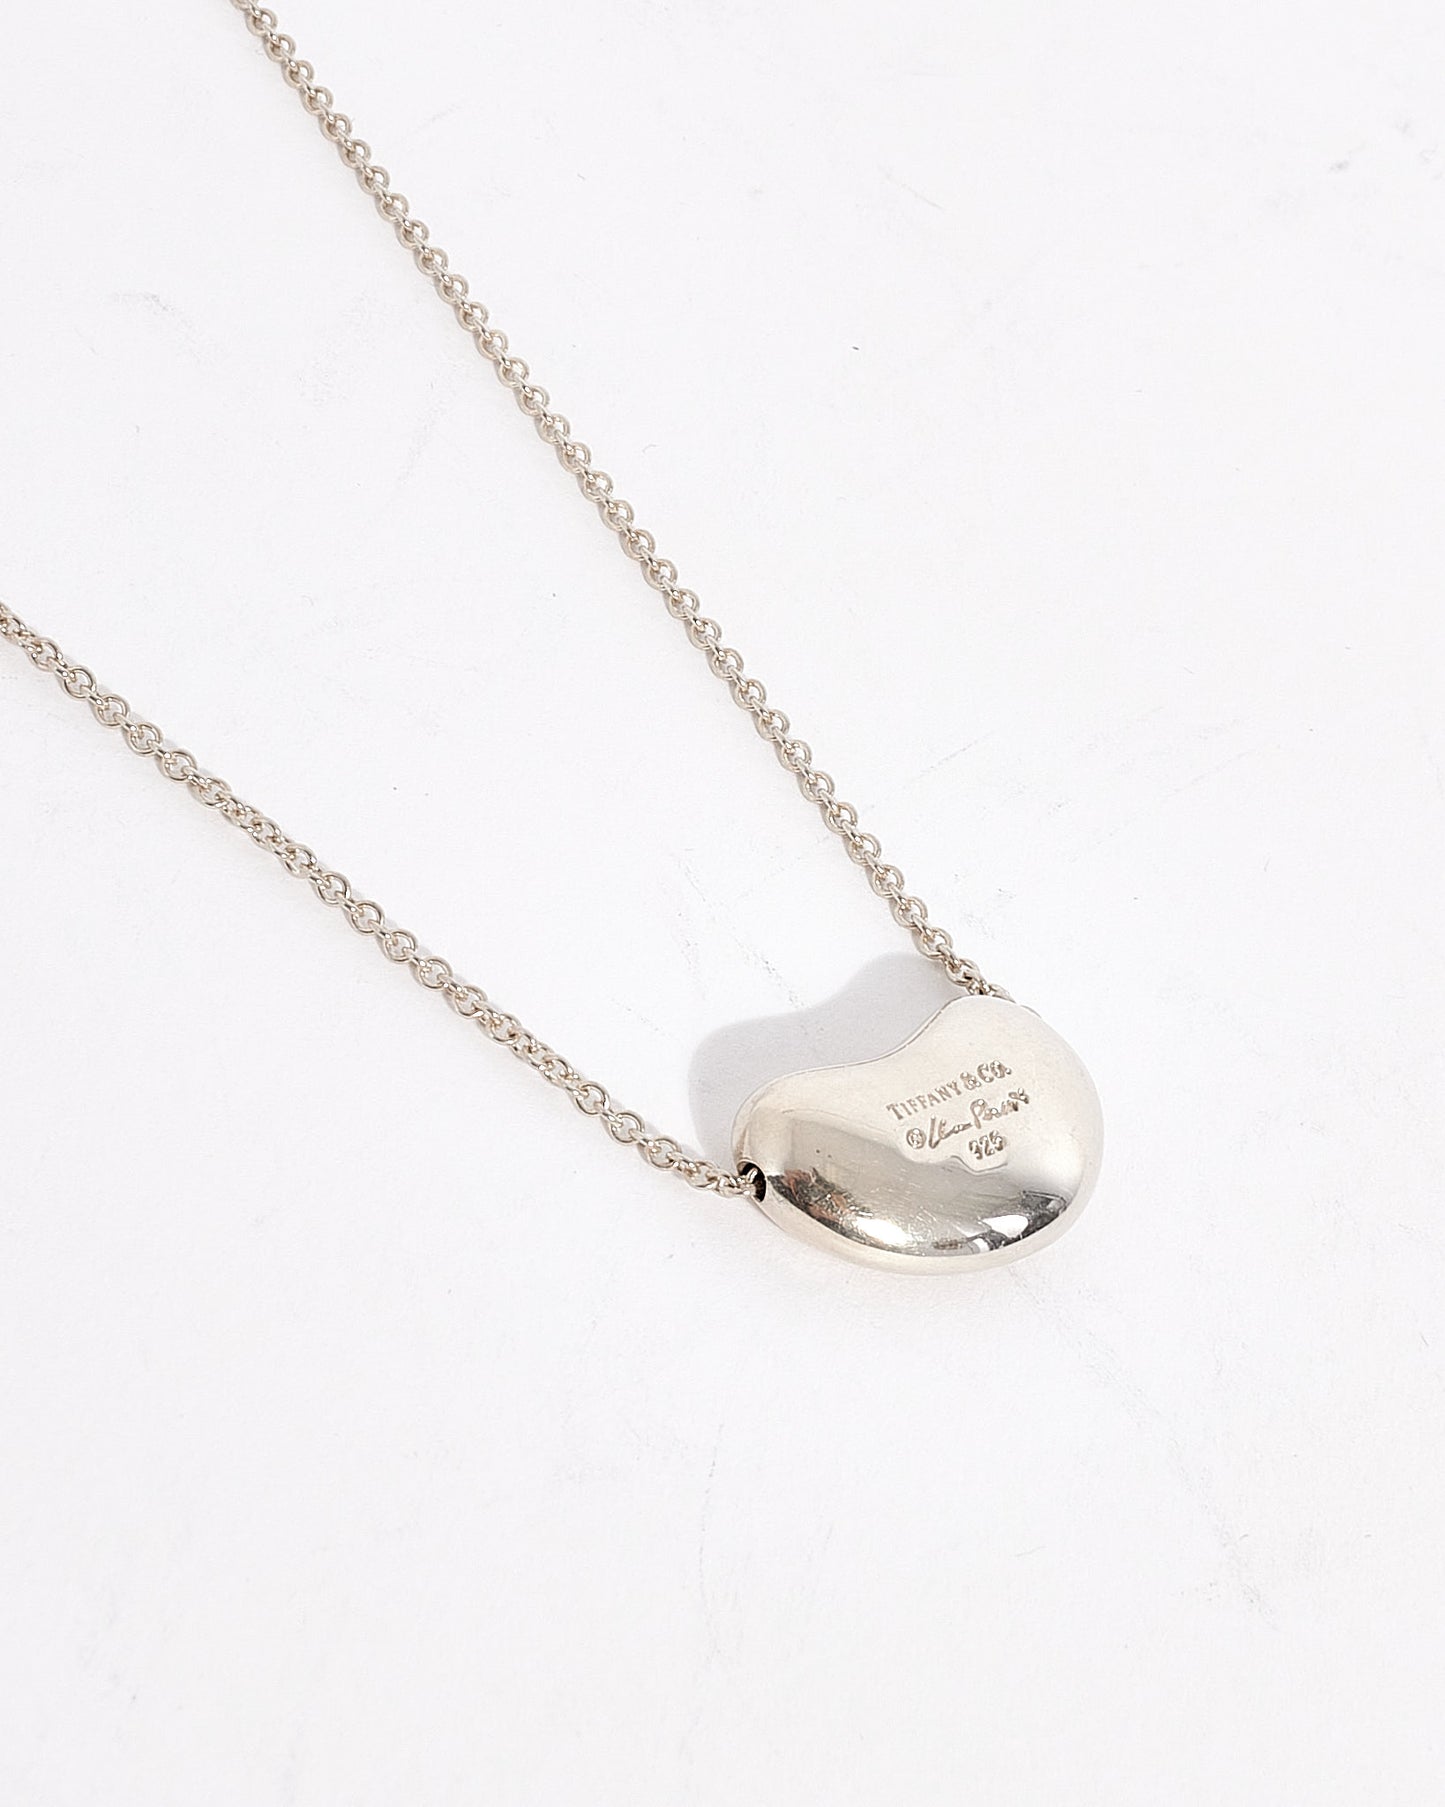 Tiffany & Co. Sterling Silver Large Bean Necklace